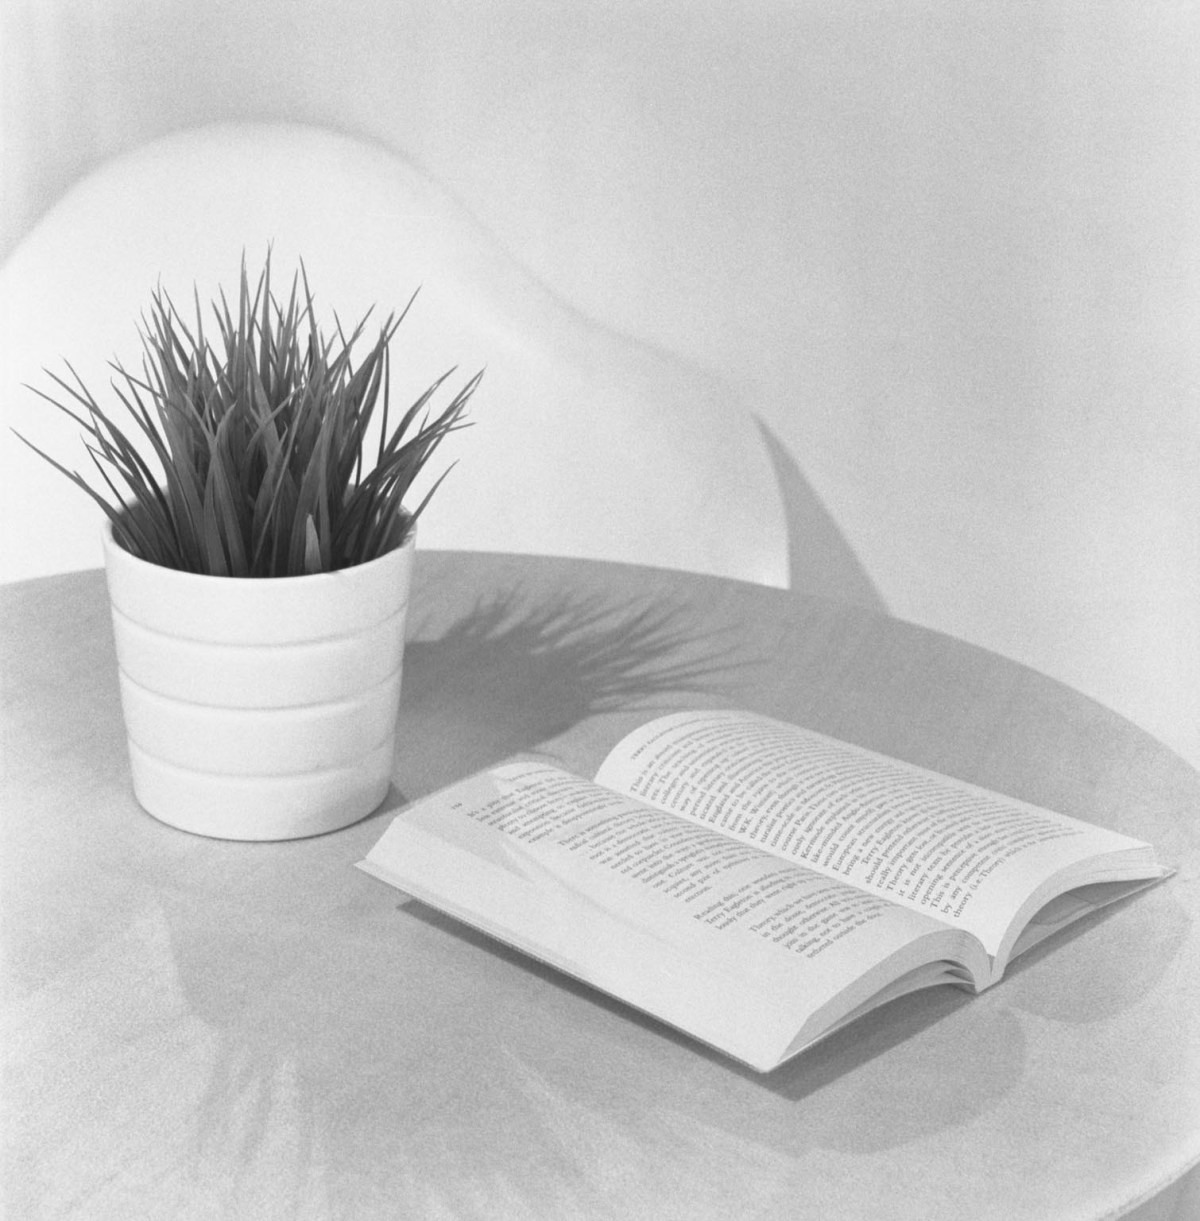 Shard End Library 2015. Shot on Hasselblad 500C/M with ILFORD FP4 PLUS